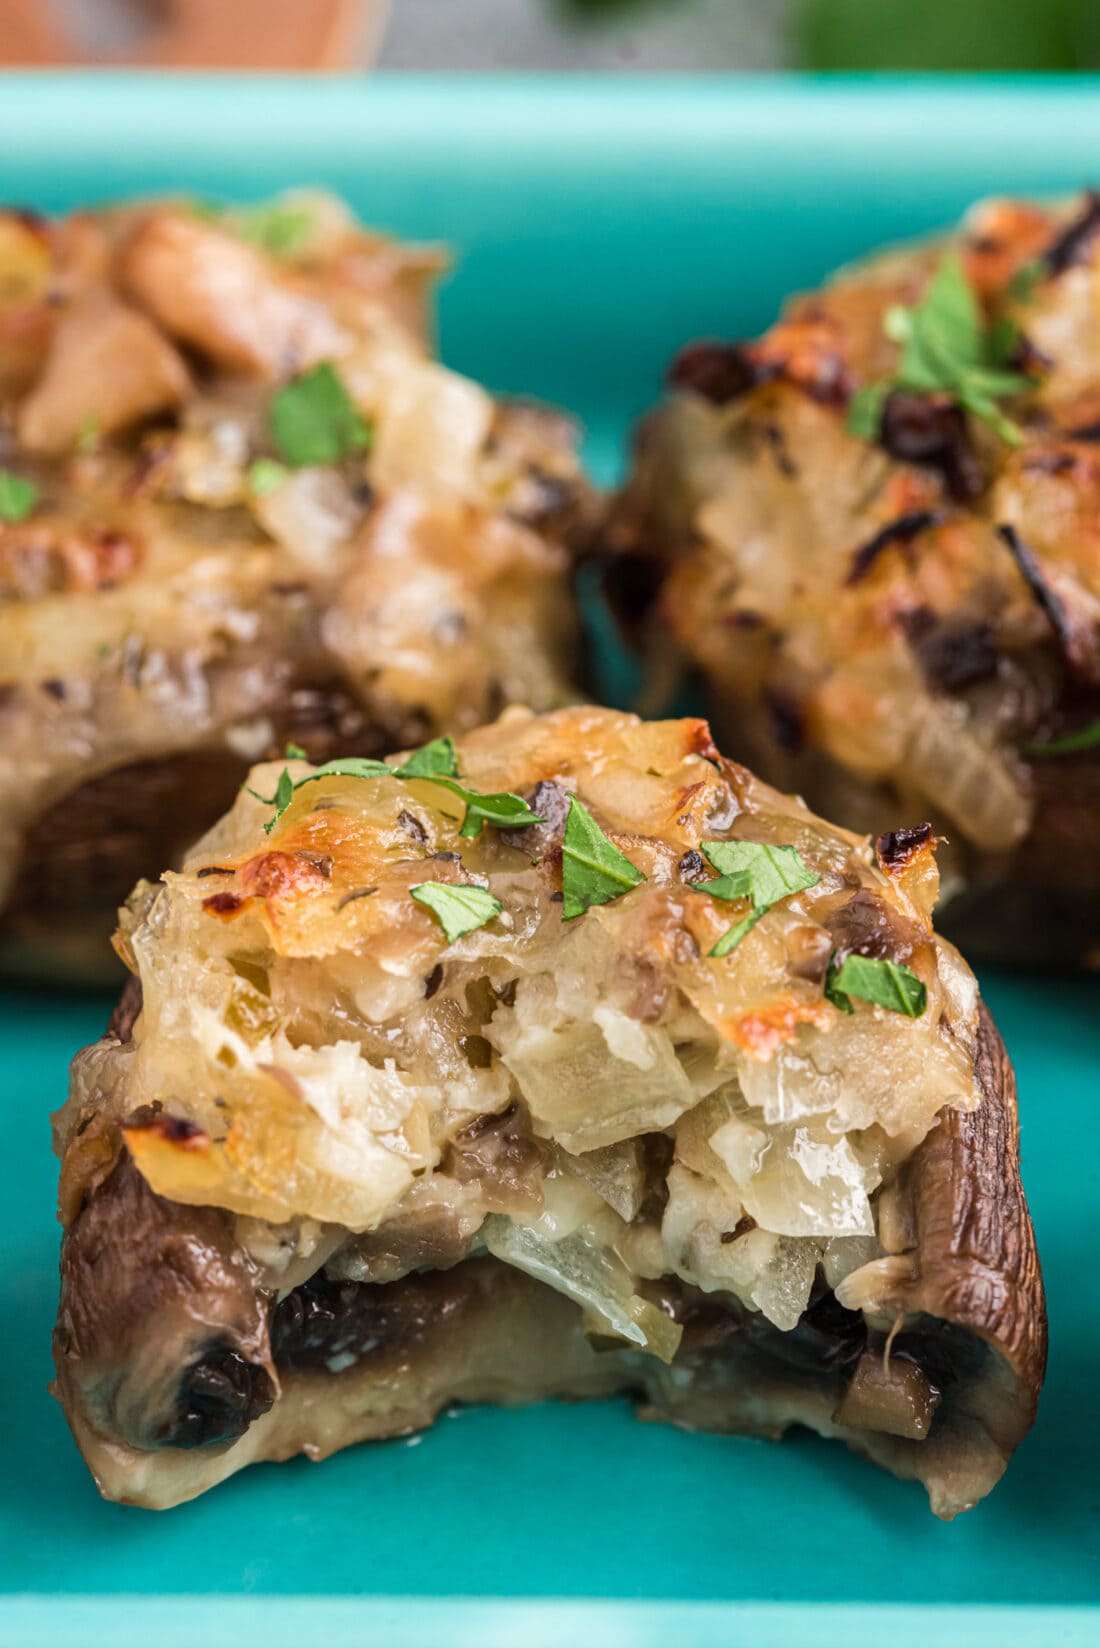 stuffed mushroom with a bite out of it